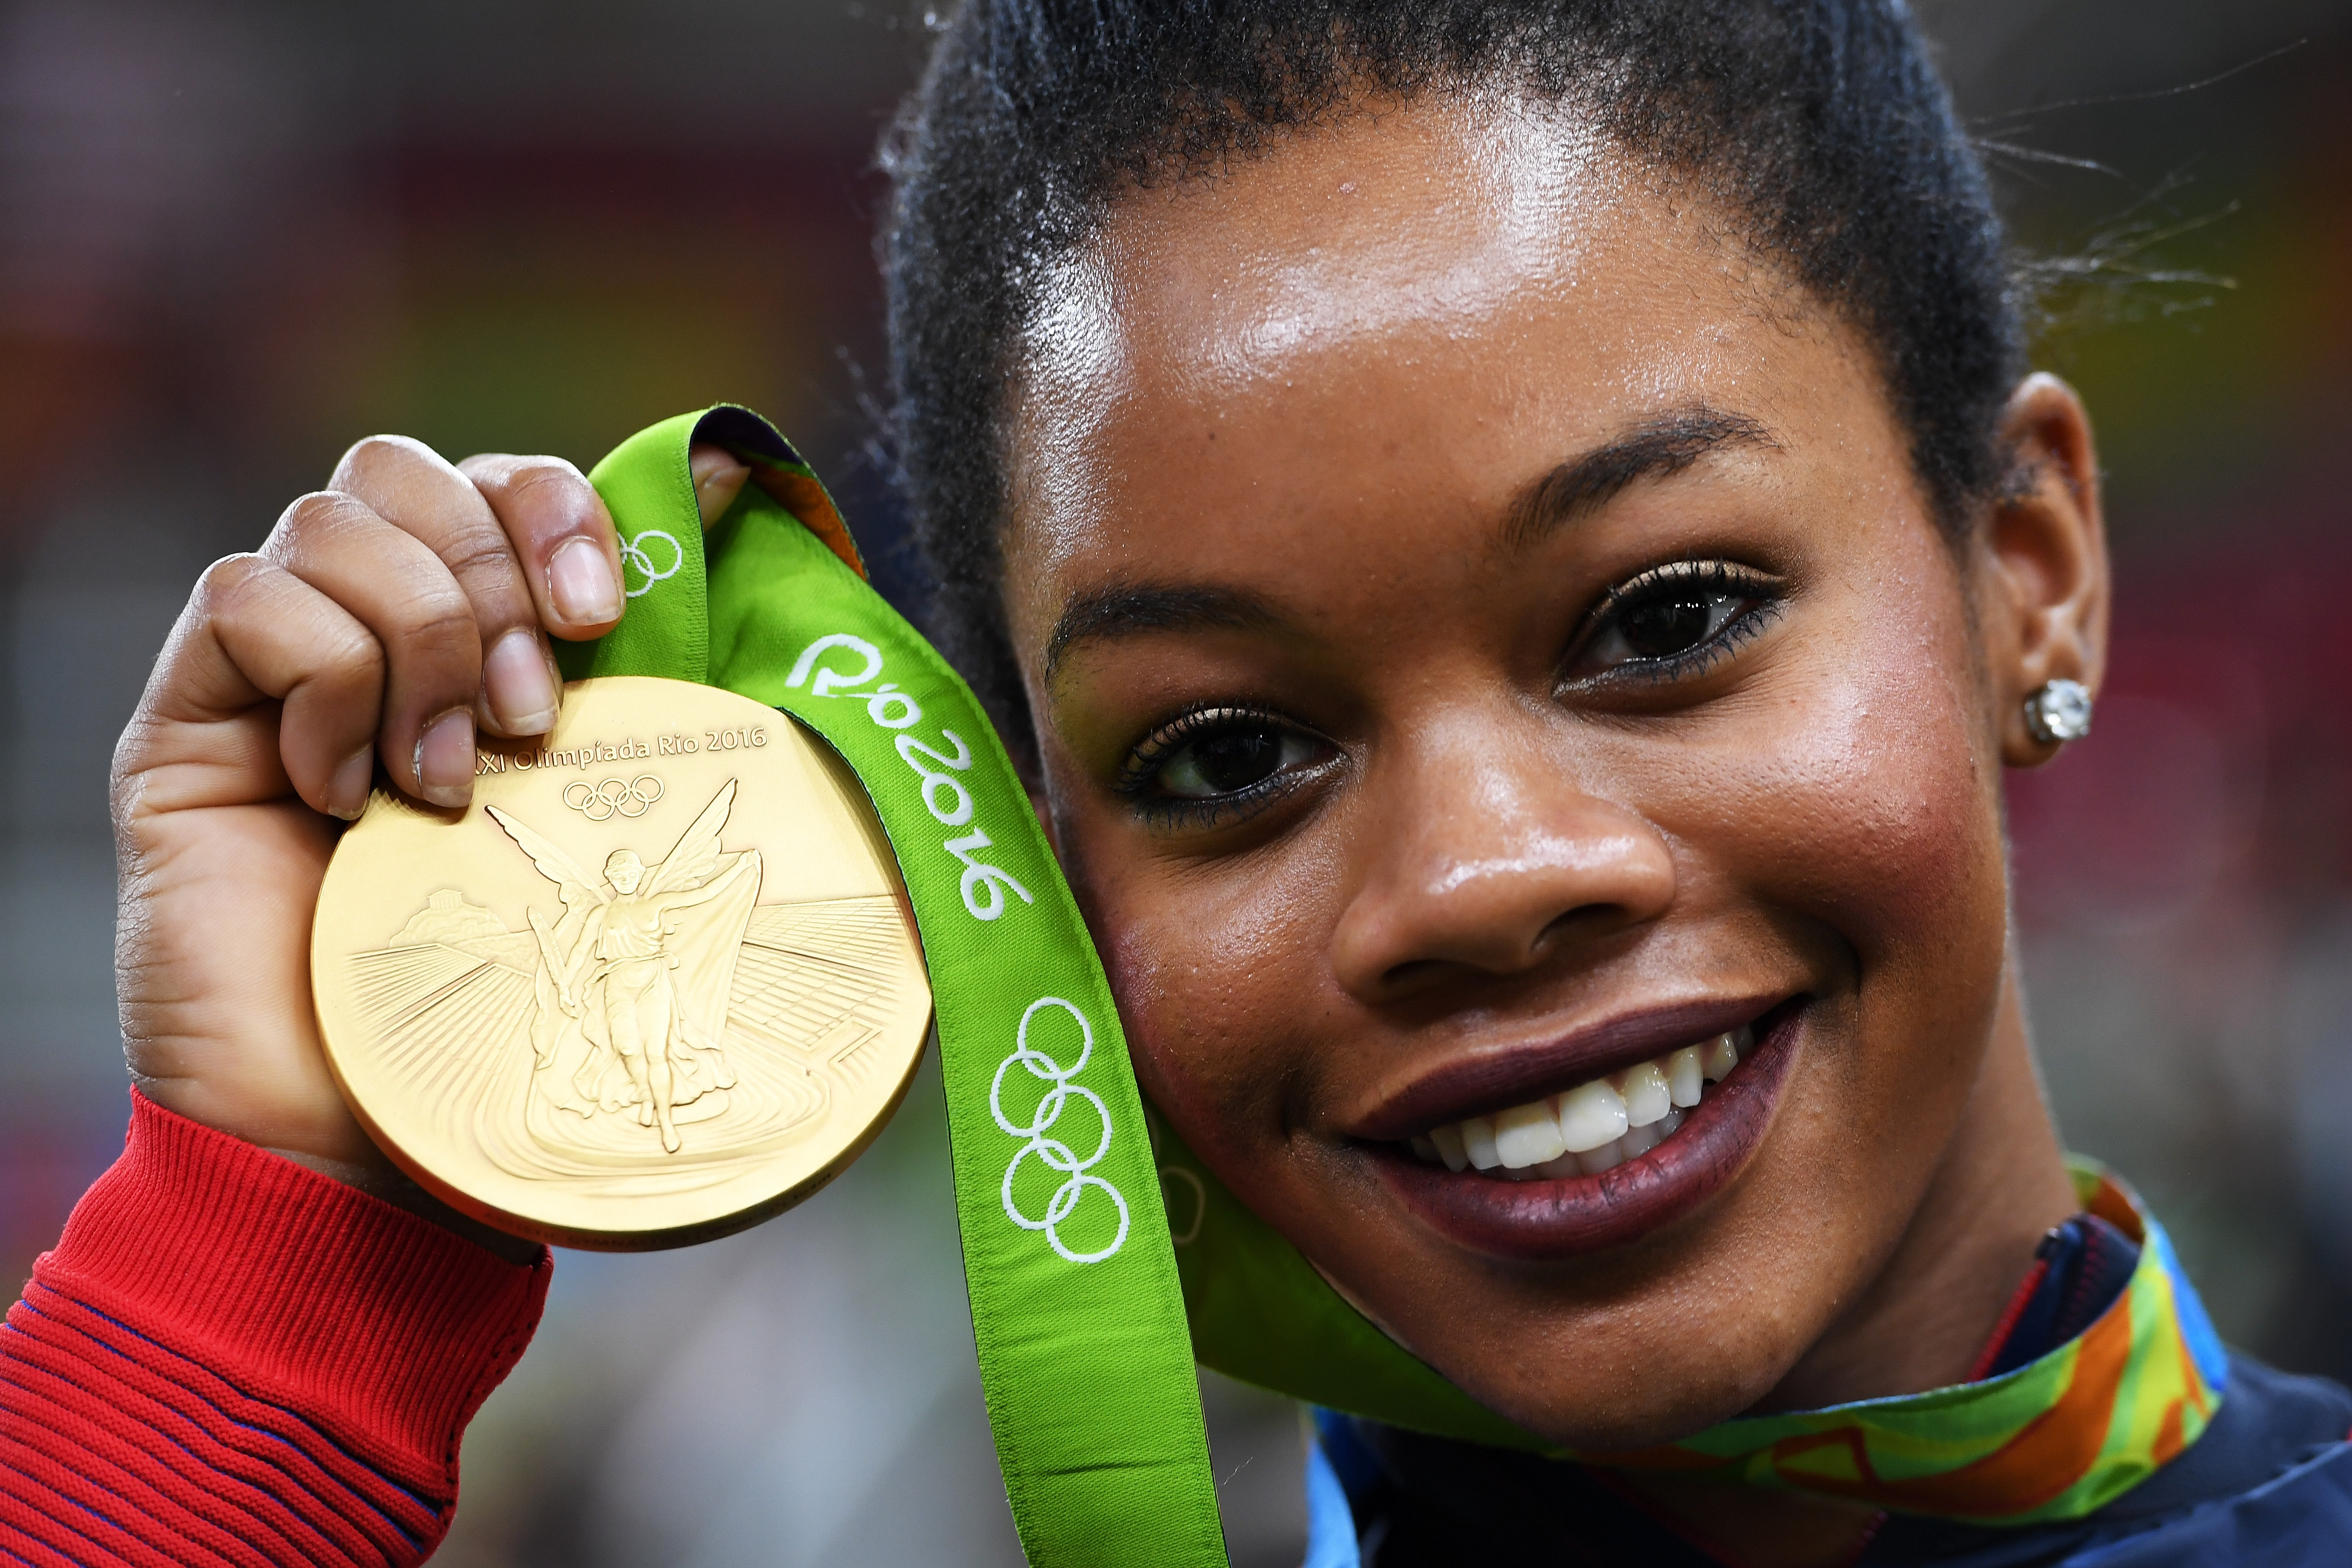 Gabrielle Douglas of the United States poses for photographs with her gold medal after the medal ceremony for the Artistic Gymnastics Women's Team on Day 4 of the Rio 2016 Olympic Games at the Rio Olympic Arena on August 9, 2016 in Rio de Janeiro, Brazil. | Source: Getty Images